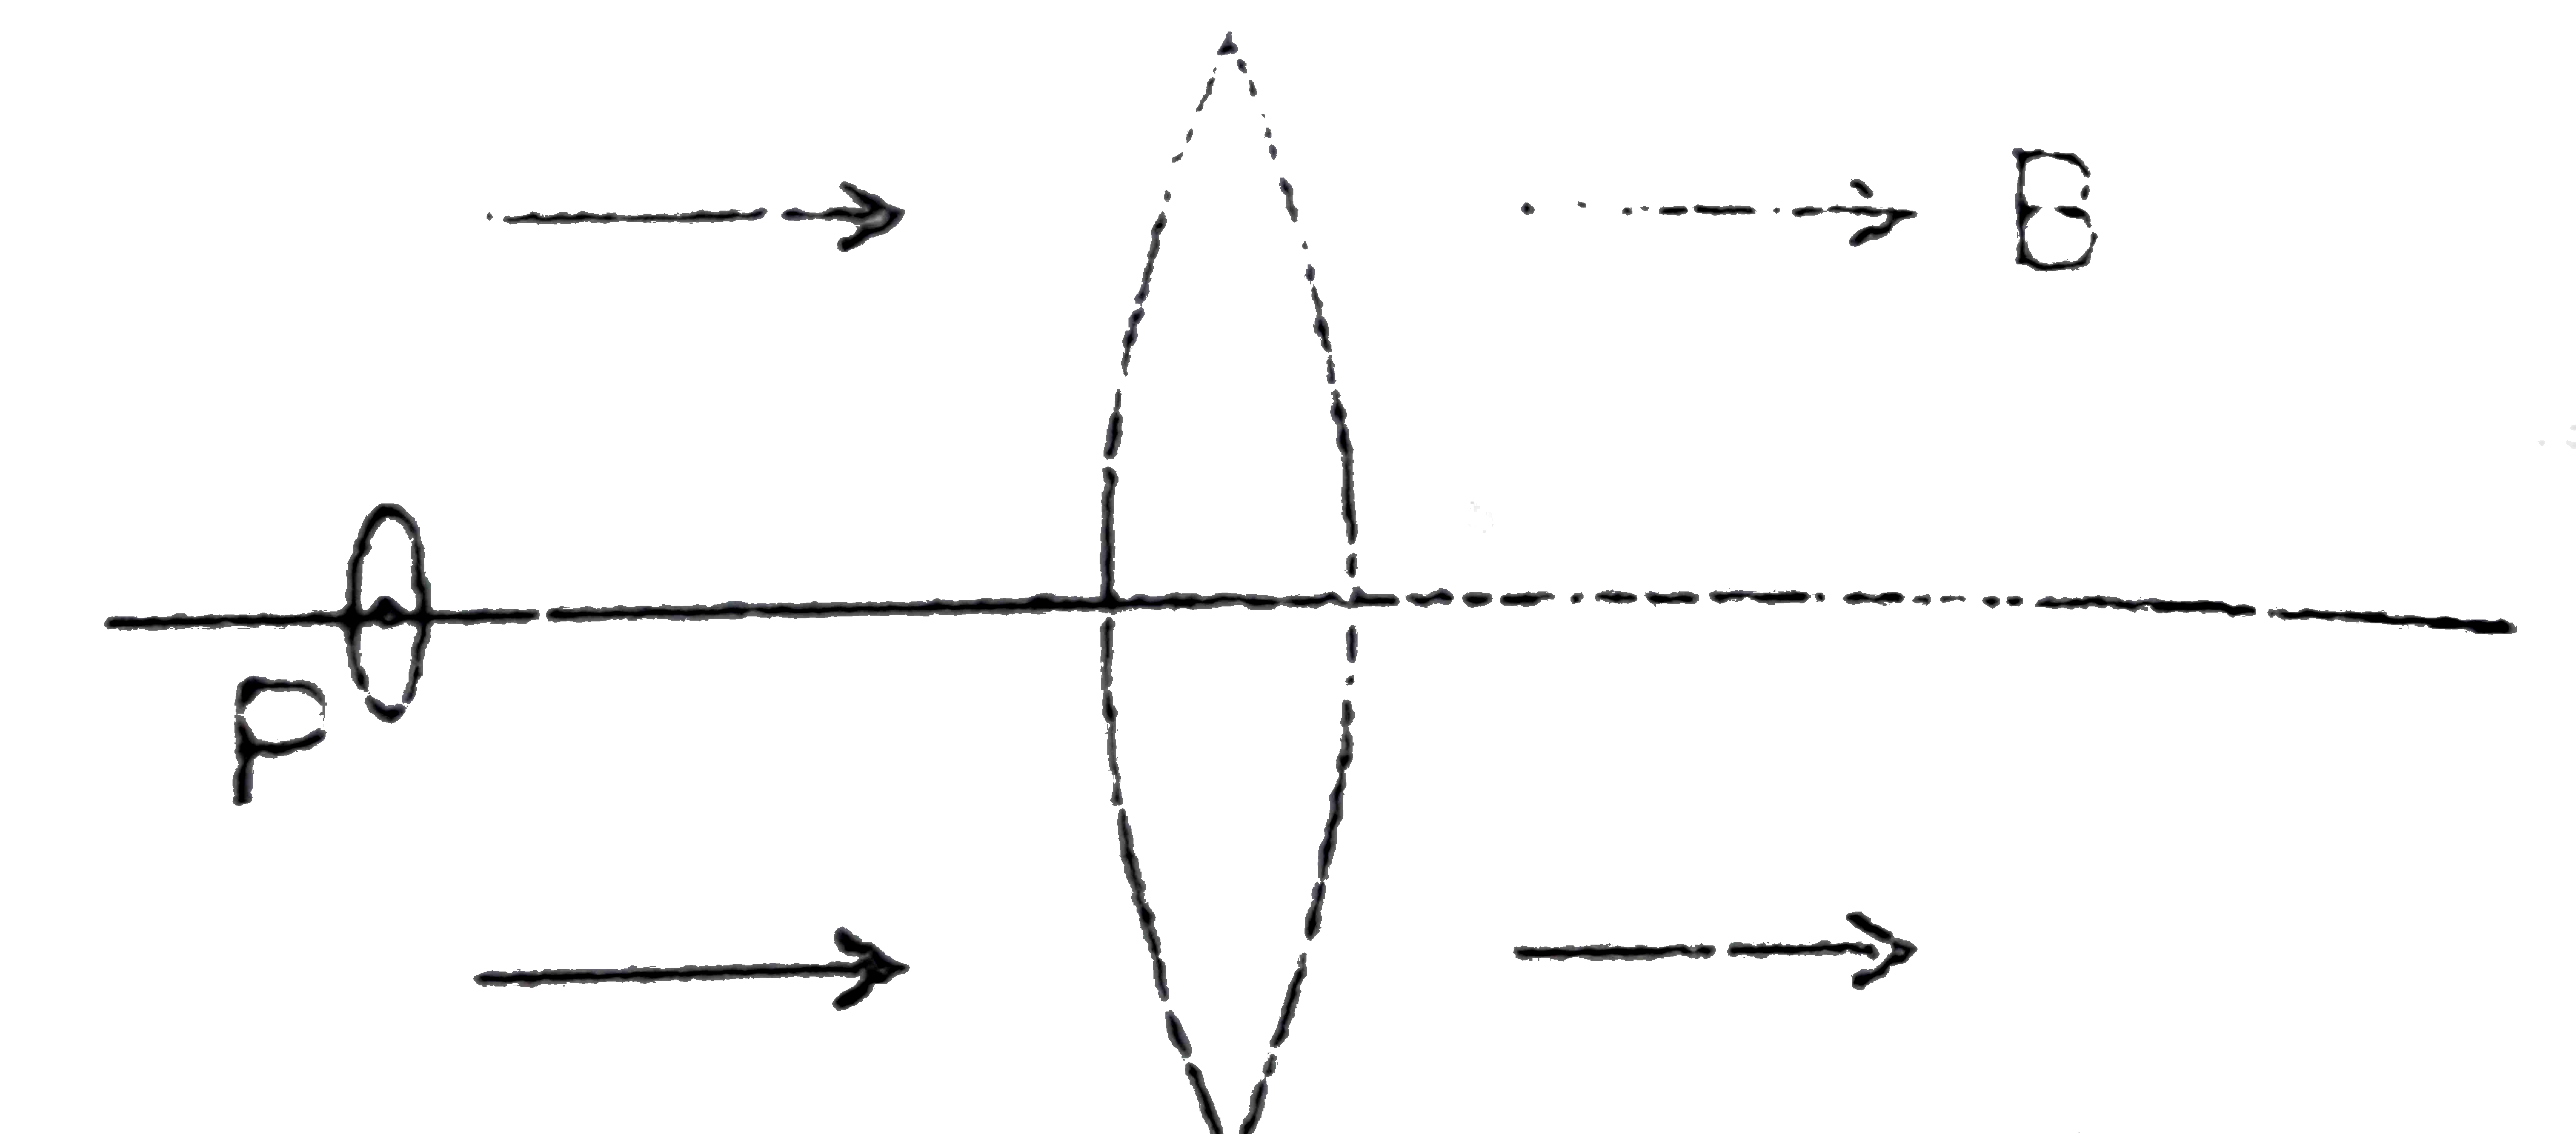 Figure shows a convex lens of focal length 10cm lying in a uniform magnetic field B of magnitude 1.2 T parallel to its principal axis.A particle havig a charge 2.0xx10^(-3) C and mass 2.0xx10^(-5) kg is projected perpendicular to the plane of the diagram with a speed of 4.8 m//s.The particle moves along a circle with its centre on the principal axis at a distance of 15 cm from the lens.The axis of the lens and of the  circle are same.Show that the image of the particle goes along a circle and find the radius of that circle.